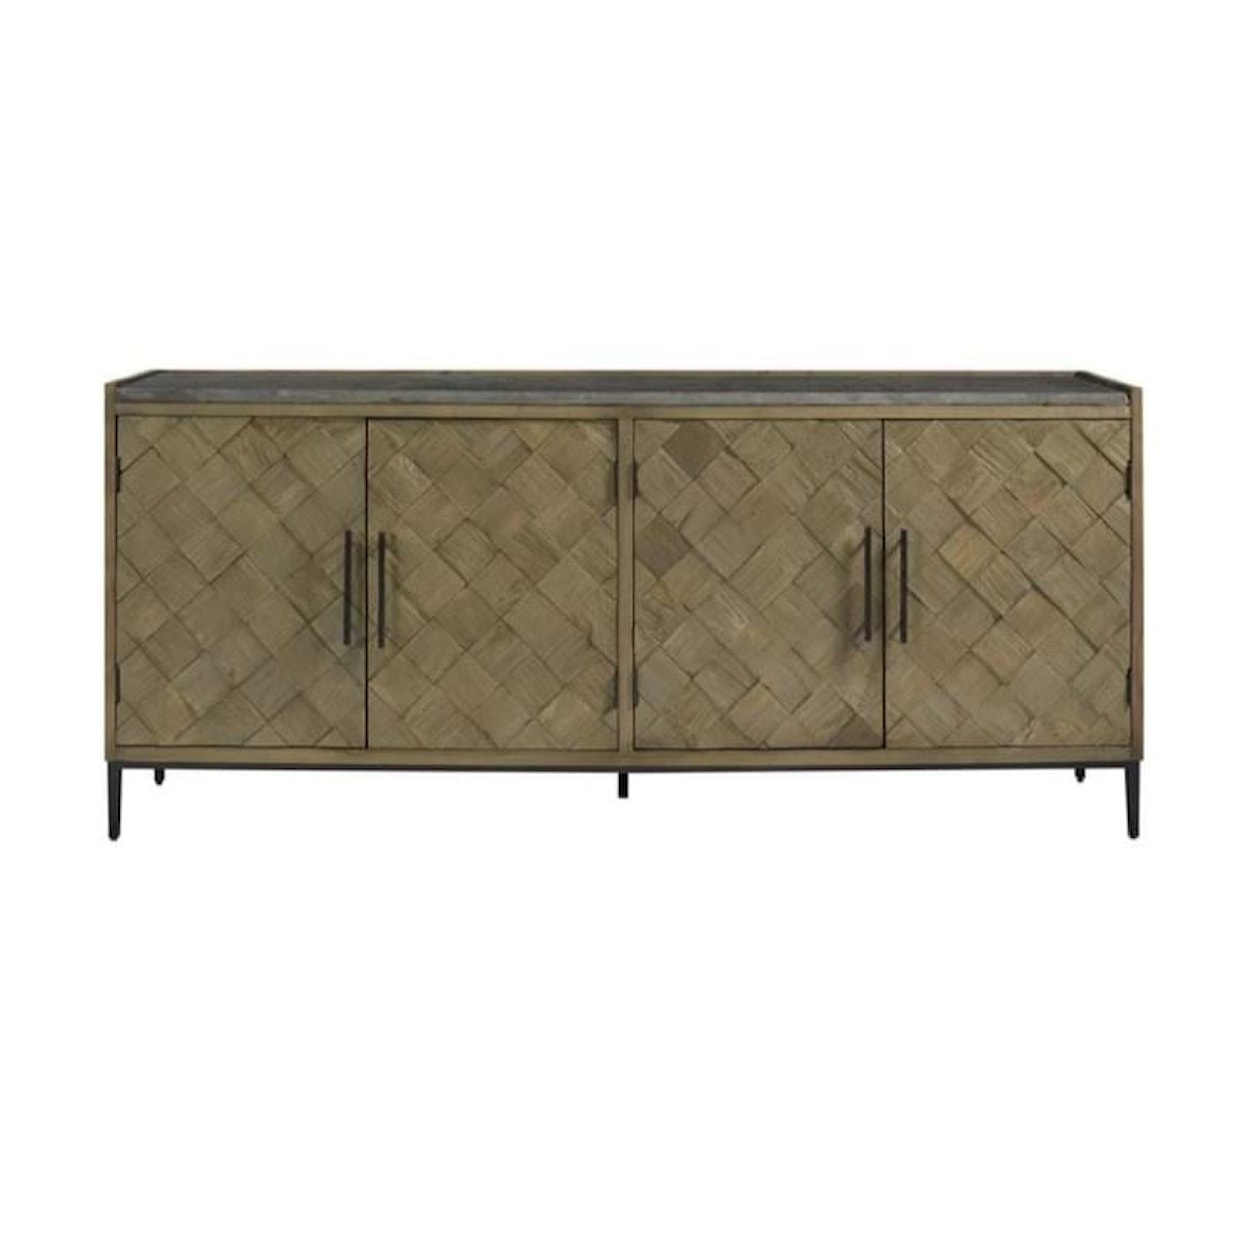 Classic Home Buffets and Sideboards Kaiden 4 Door Sideboard